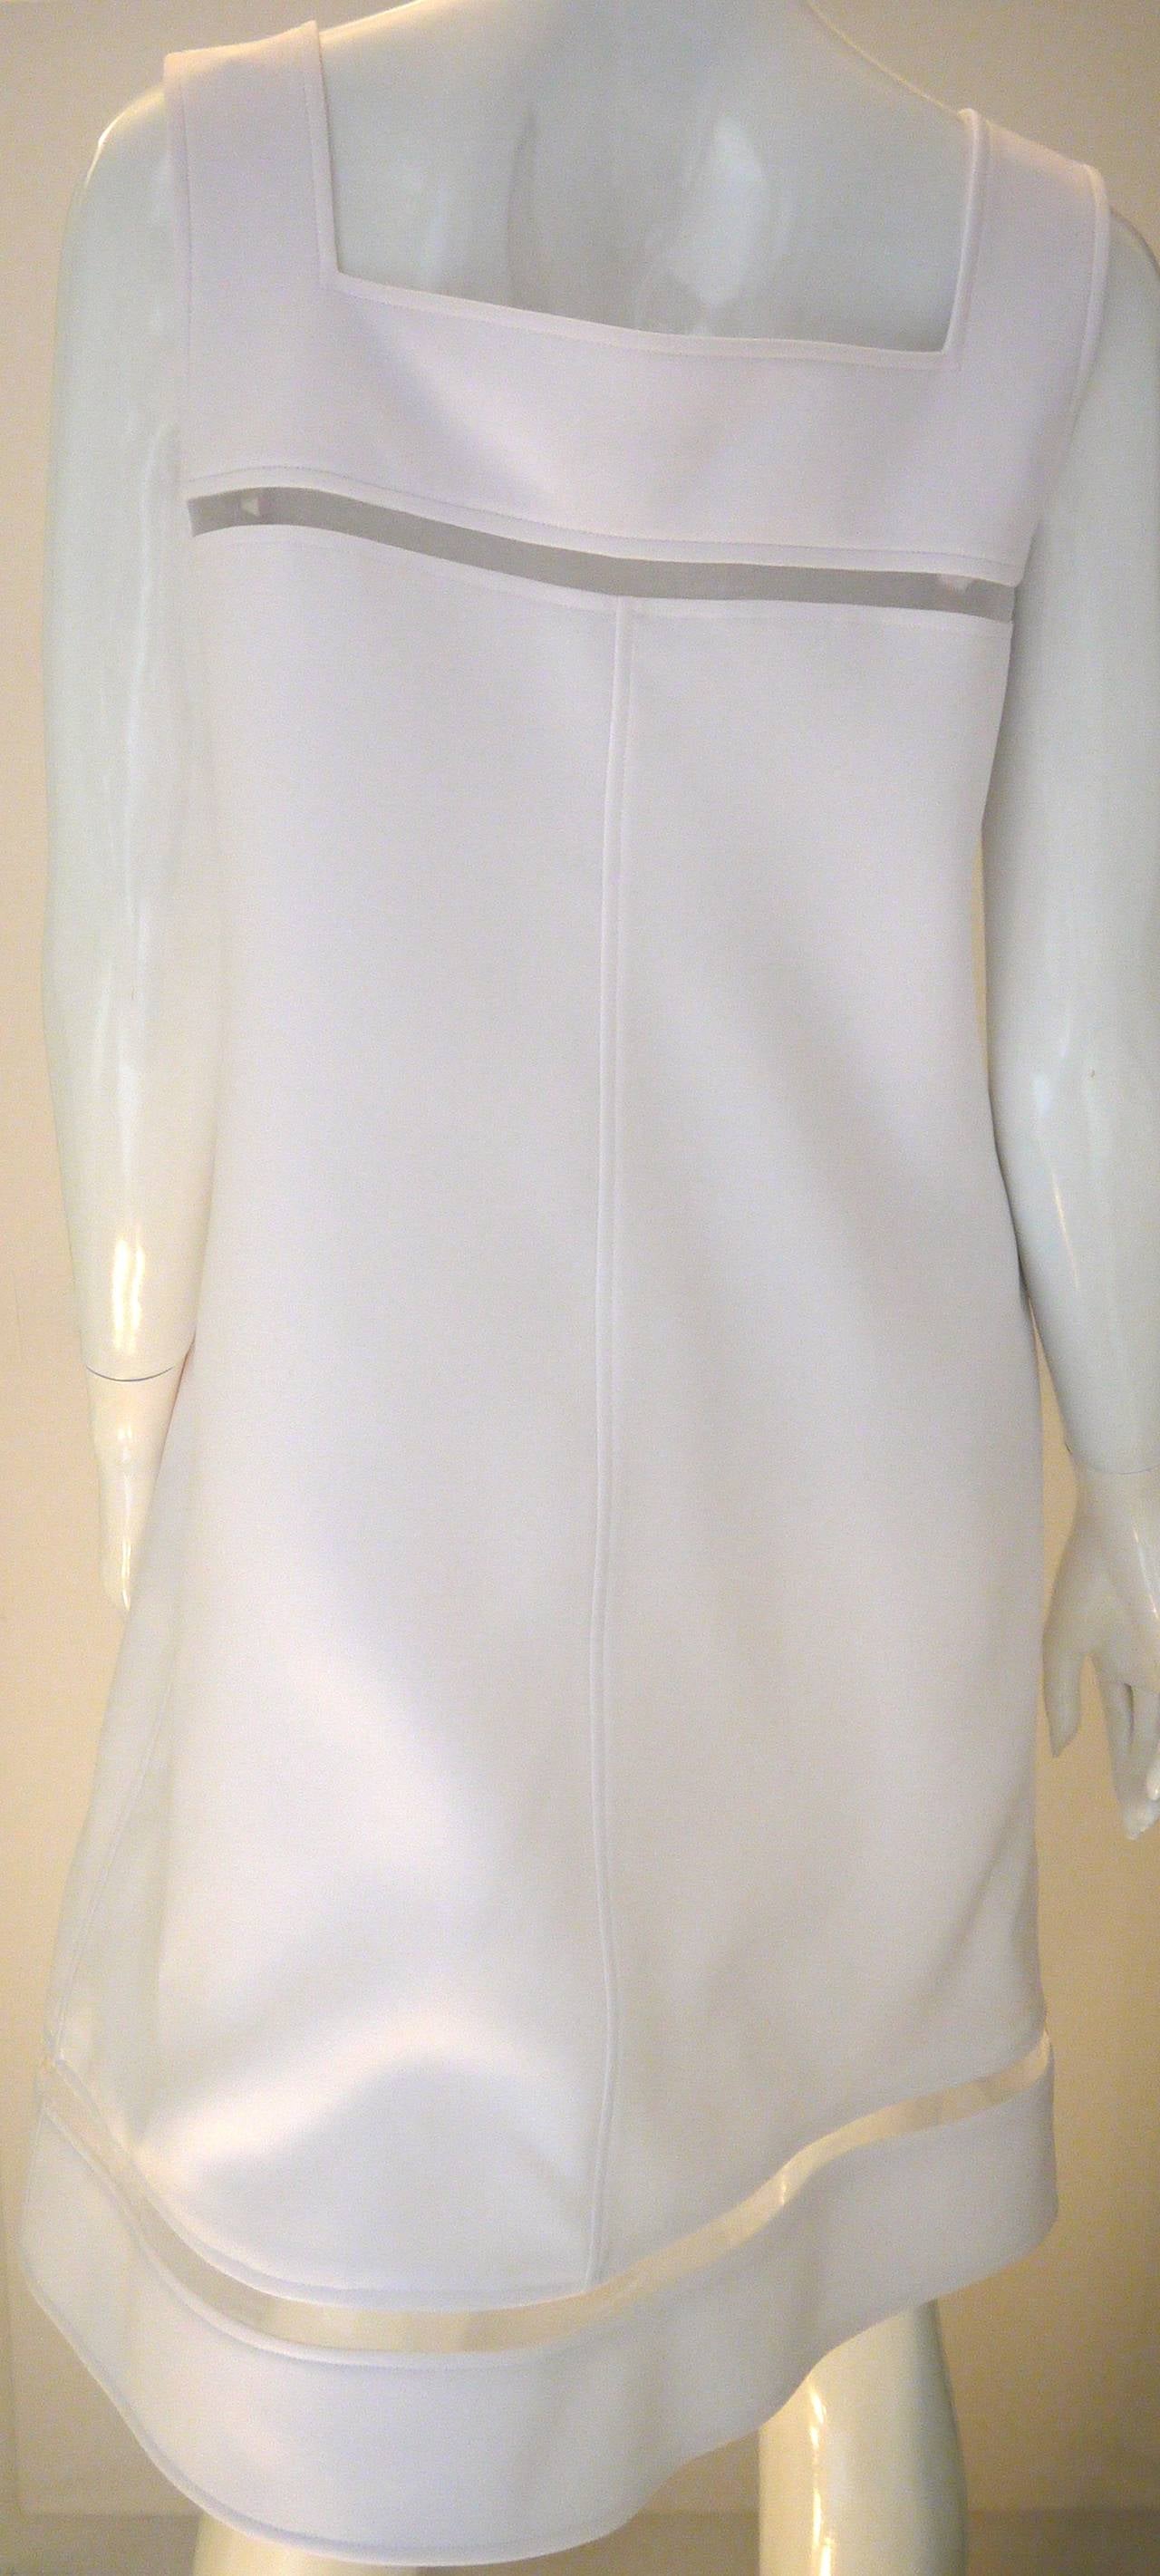 Courreges white cocktail dress with peek-a-boo mesh cross sections at the bust and at the bottom of the dress. Gorgeous white dress that is a size 44. Dress is 100% polyester and made in France. Fantastic dress for the avid Courreges fan or someone